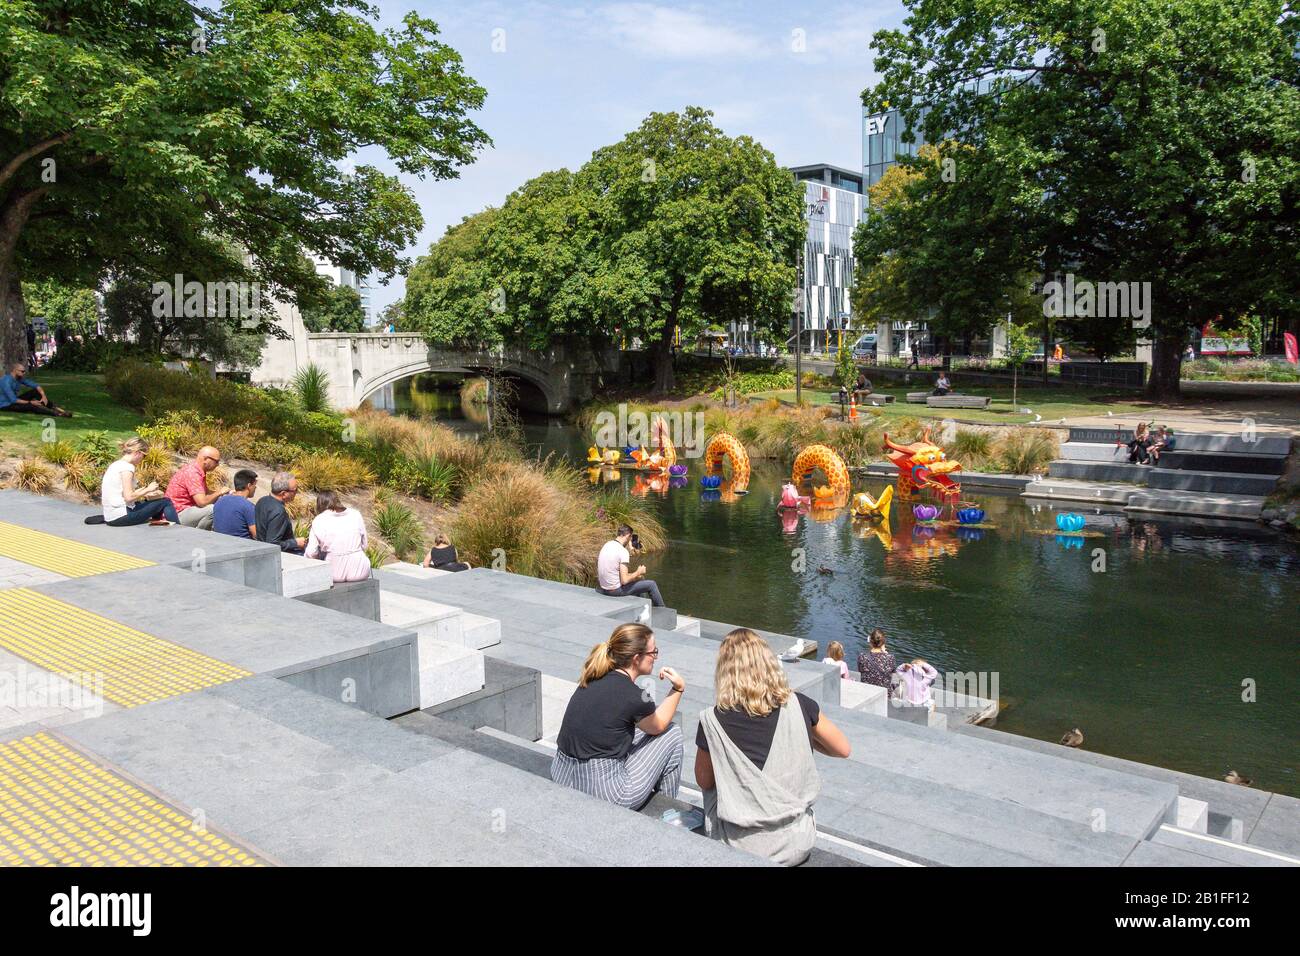 Riverside seating by River Avon, Oxford Terrace, Christchurch Central City, Christchurch, Canterbury Region, New Zealand Stock Photo